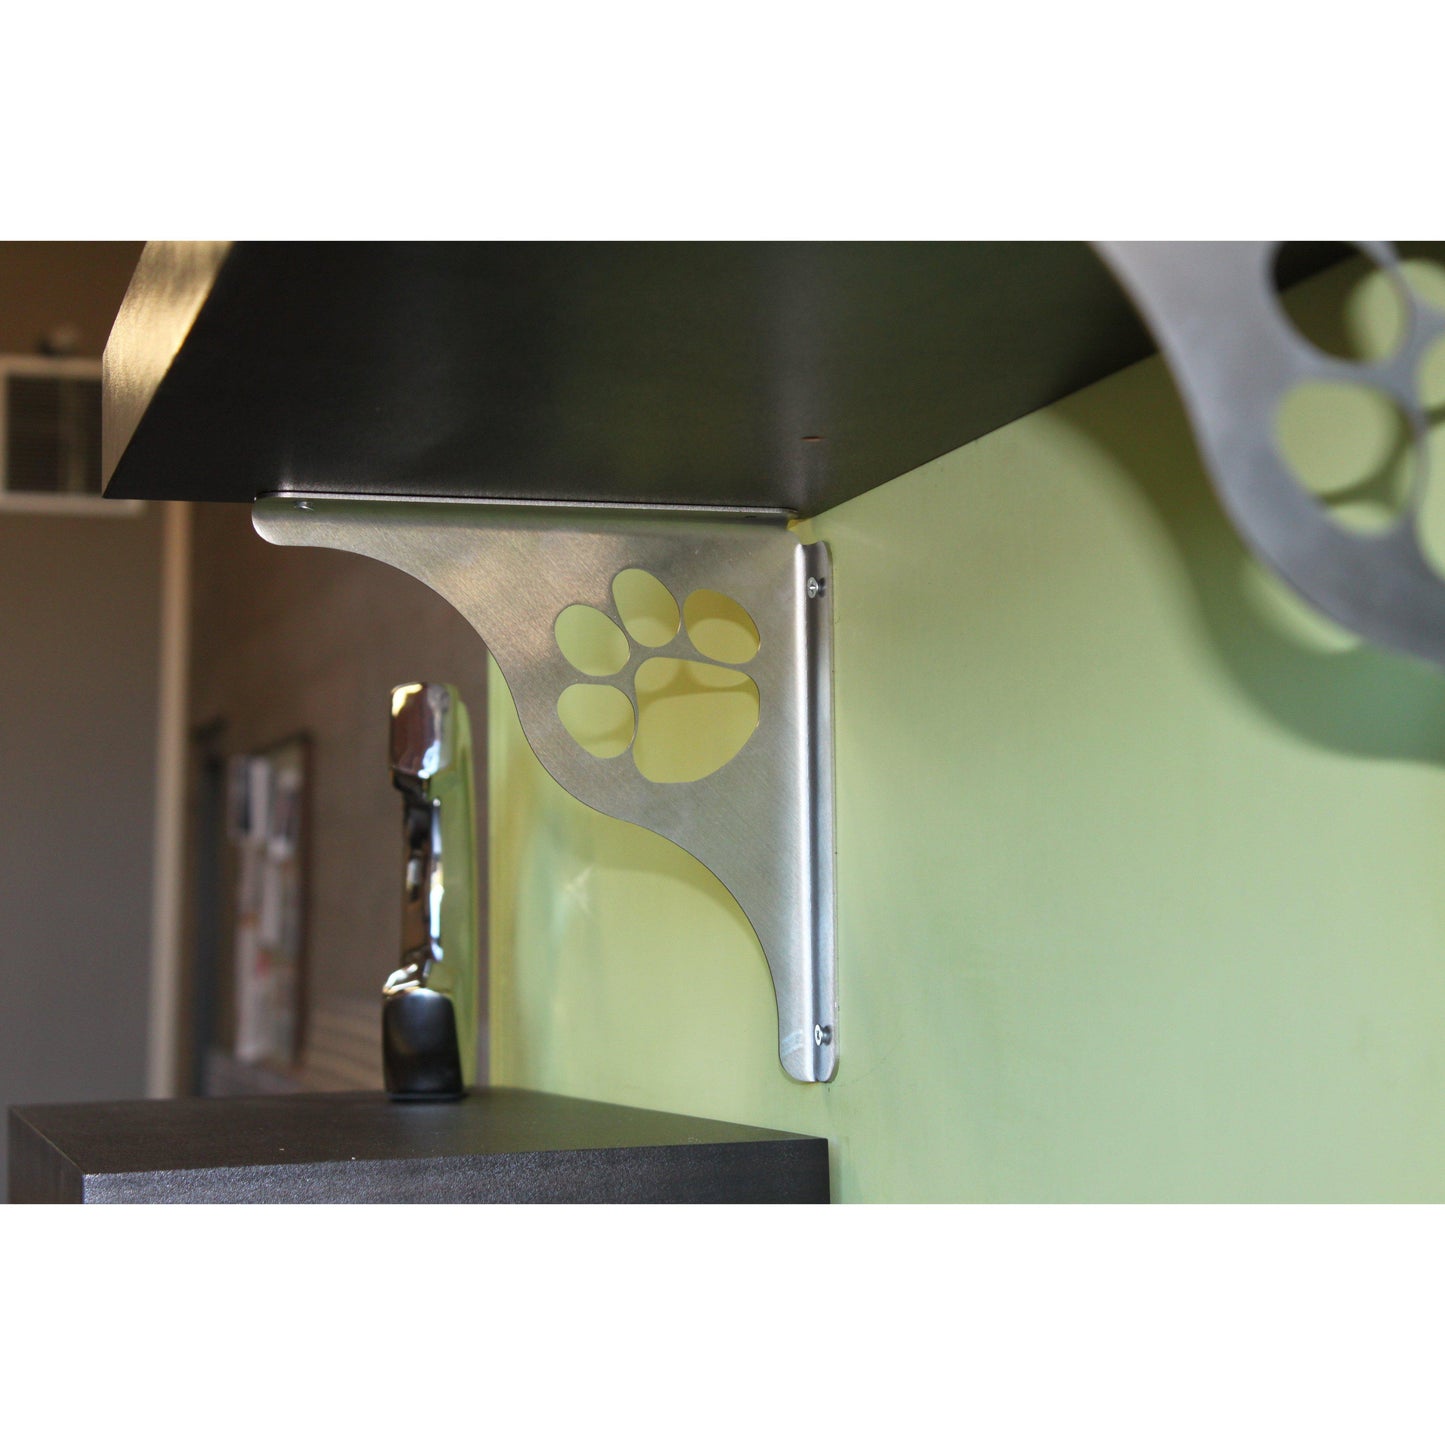 Dog Paw Stainless Steel Shelf Bracket - Paws for Cause